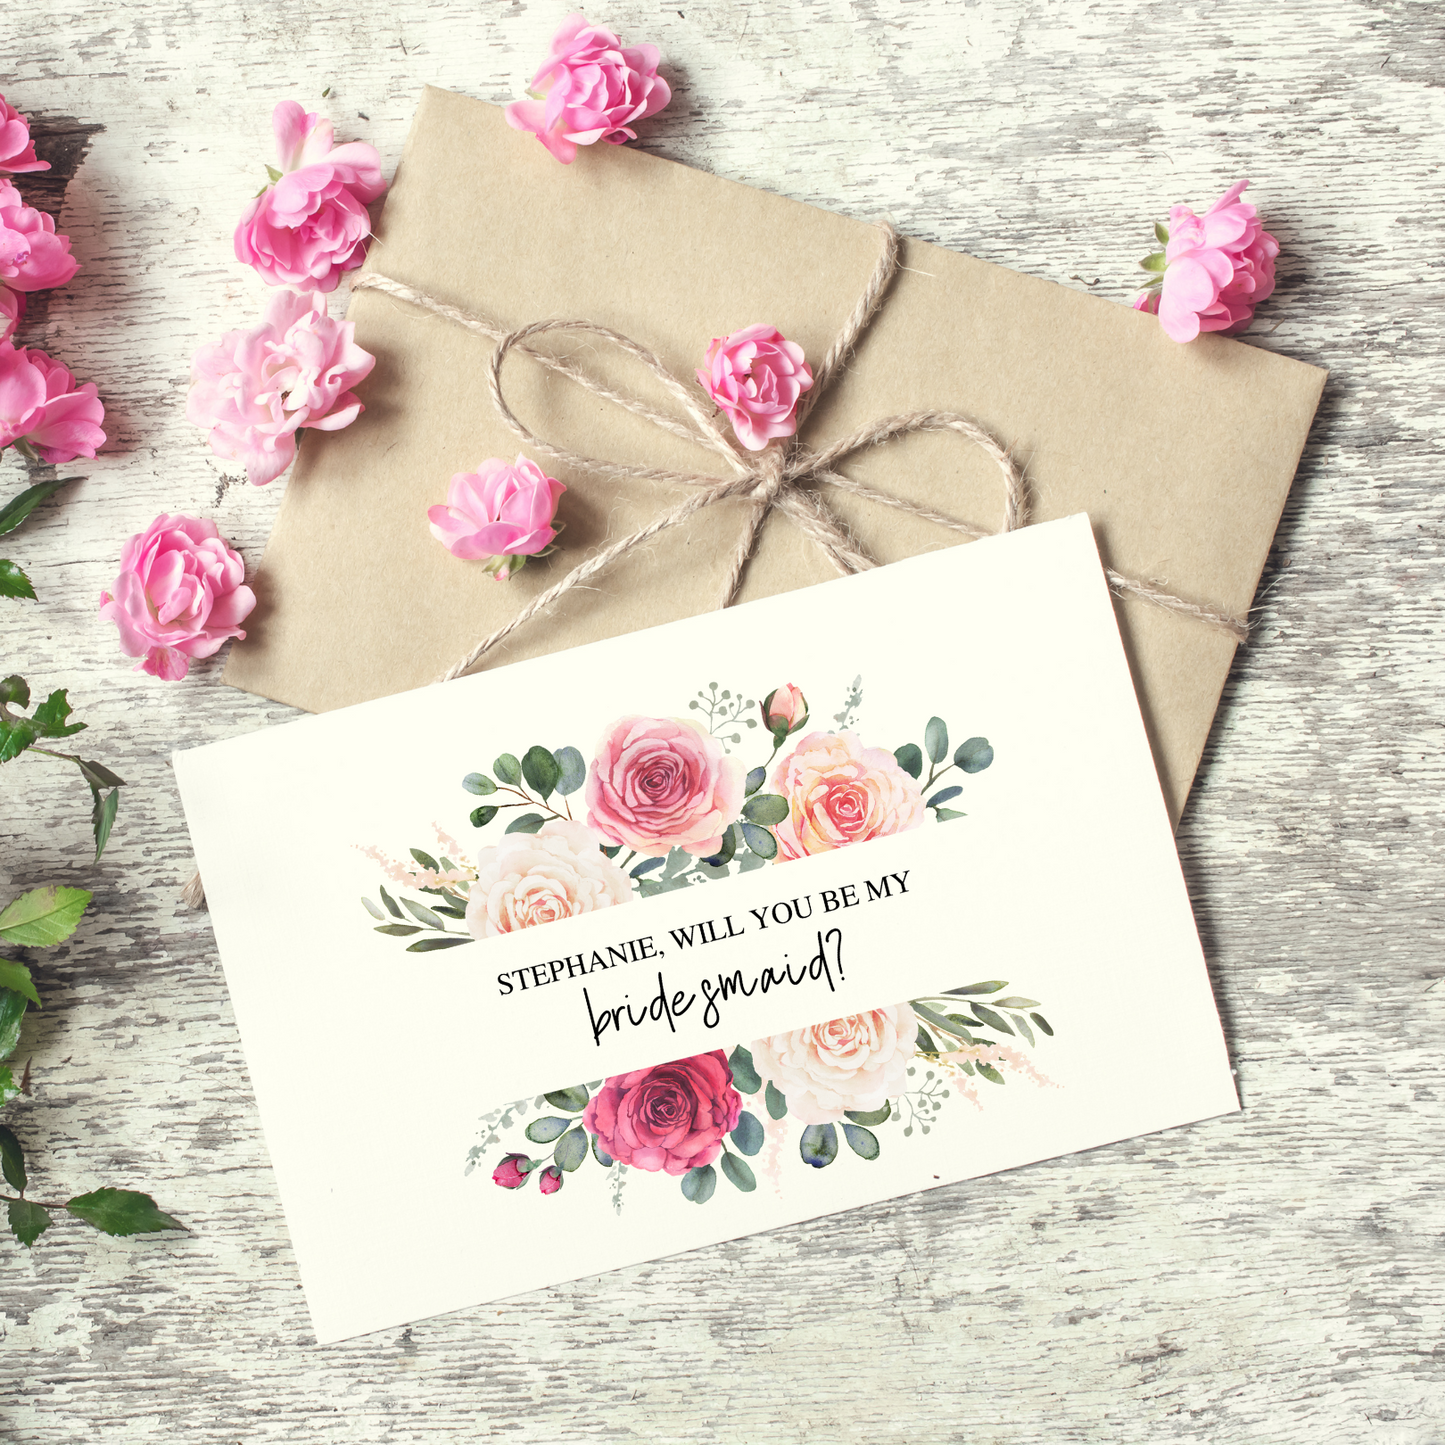 A white card with a burst of pink hued roses can be seen laying on top of a kraft paper envelope that's tied with a thin piece of brown string. There are small, pink roses sprinkled over the kraft envelope with a glimpse of a full bouquet peaking in from the left hand side of the image against a grey textured background.